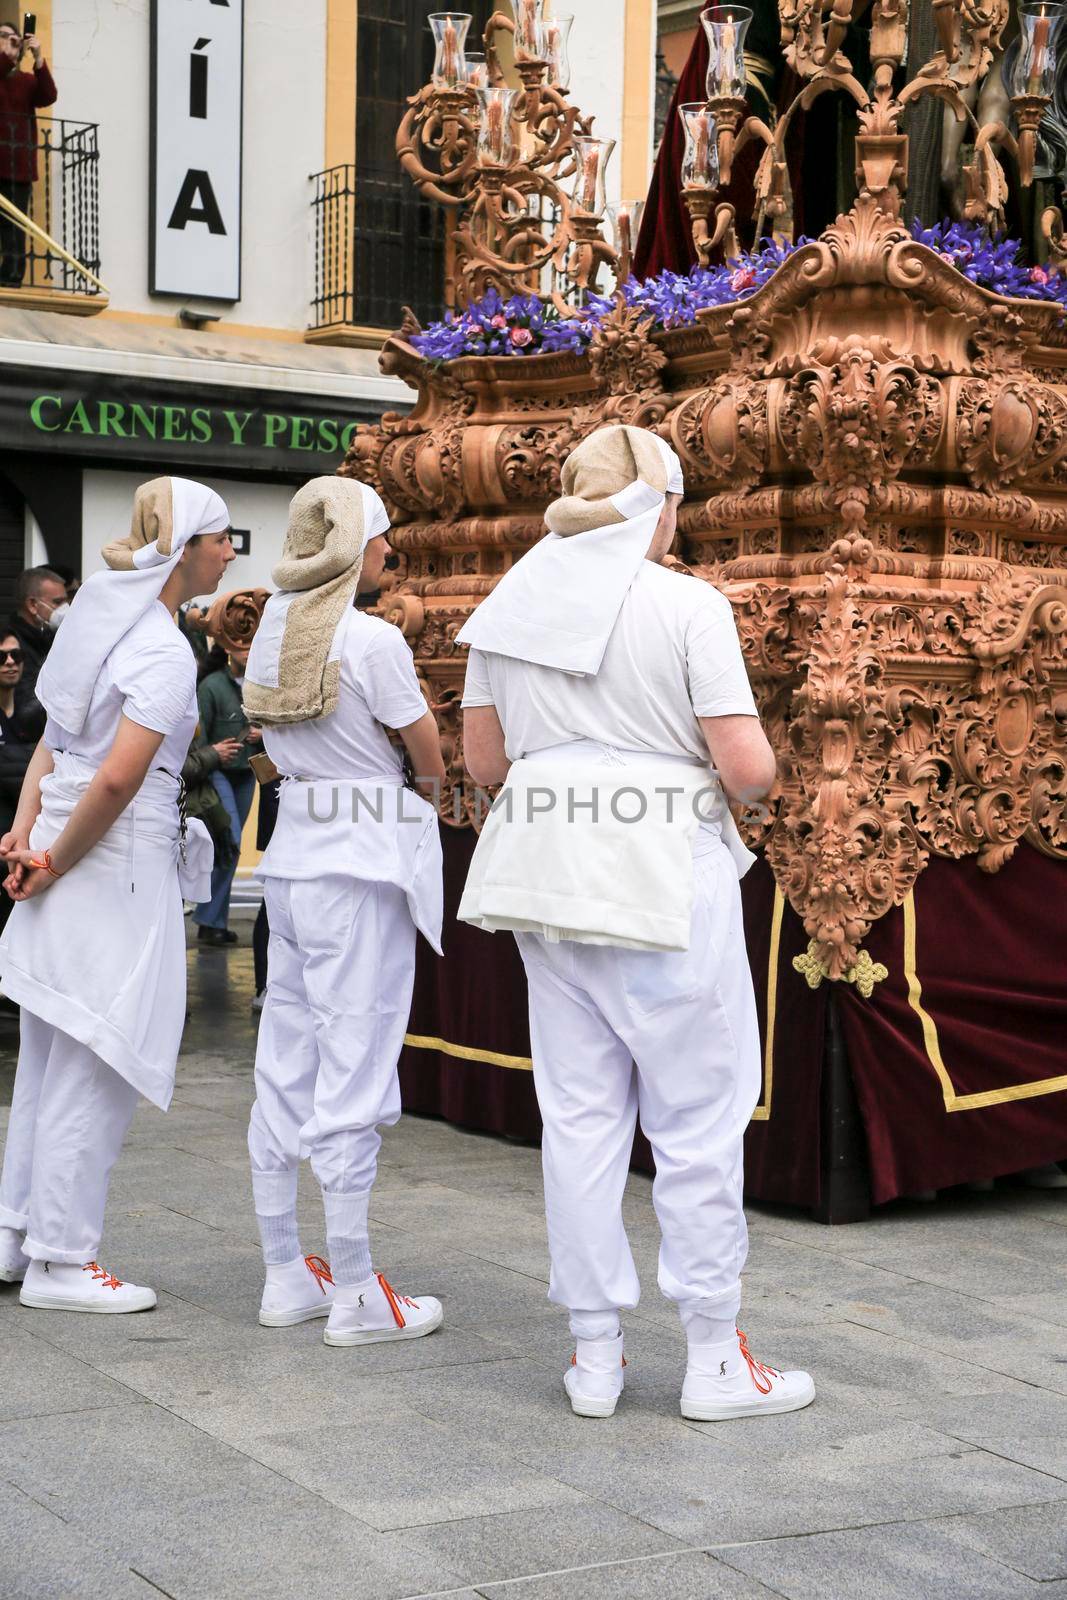 Bearers of Easter Parade in procession of Holy Week in Spain by soniabonet